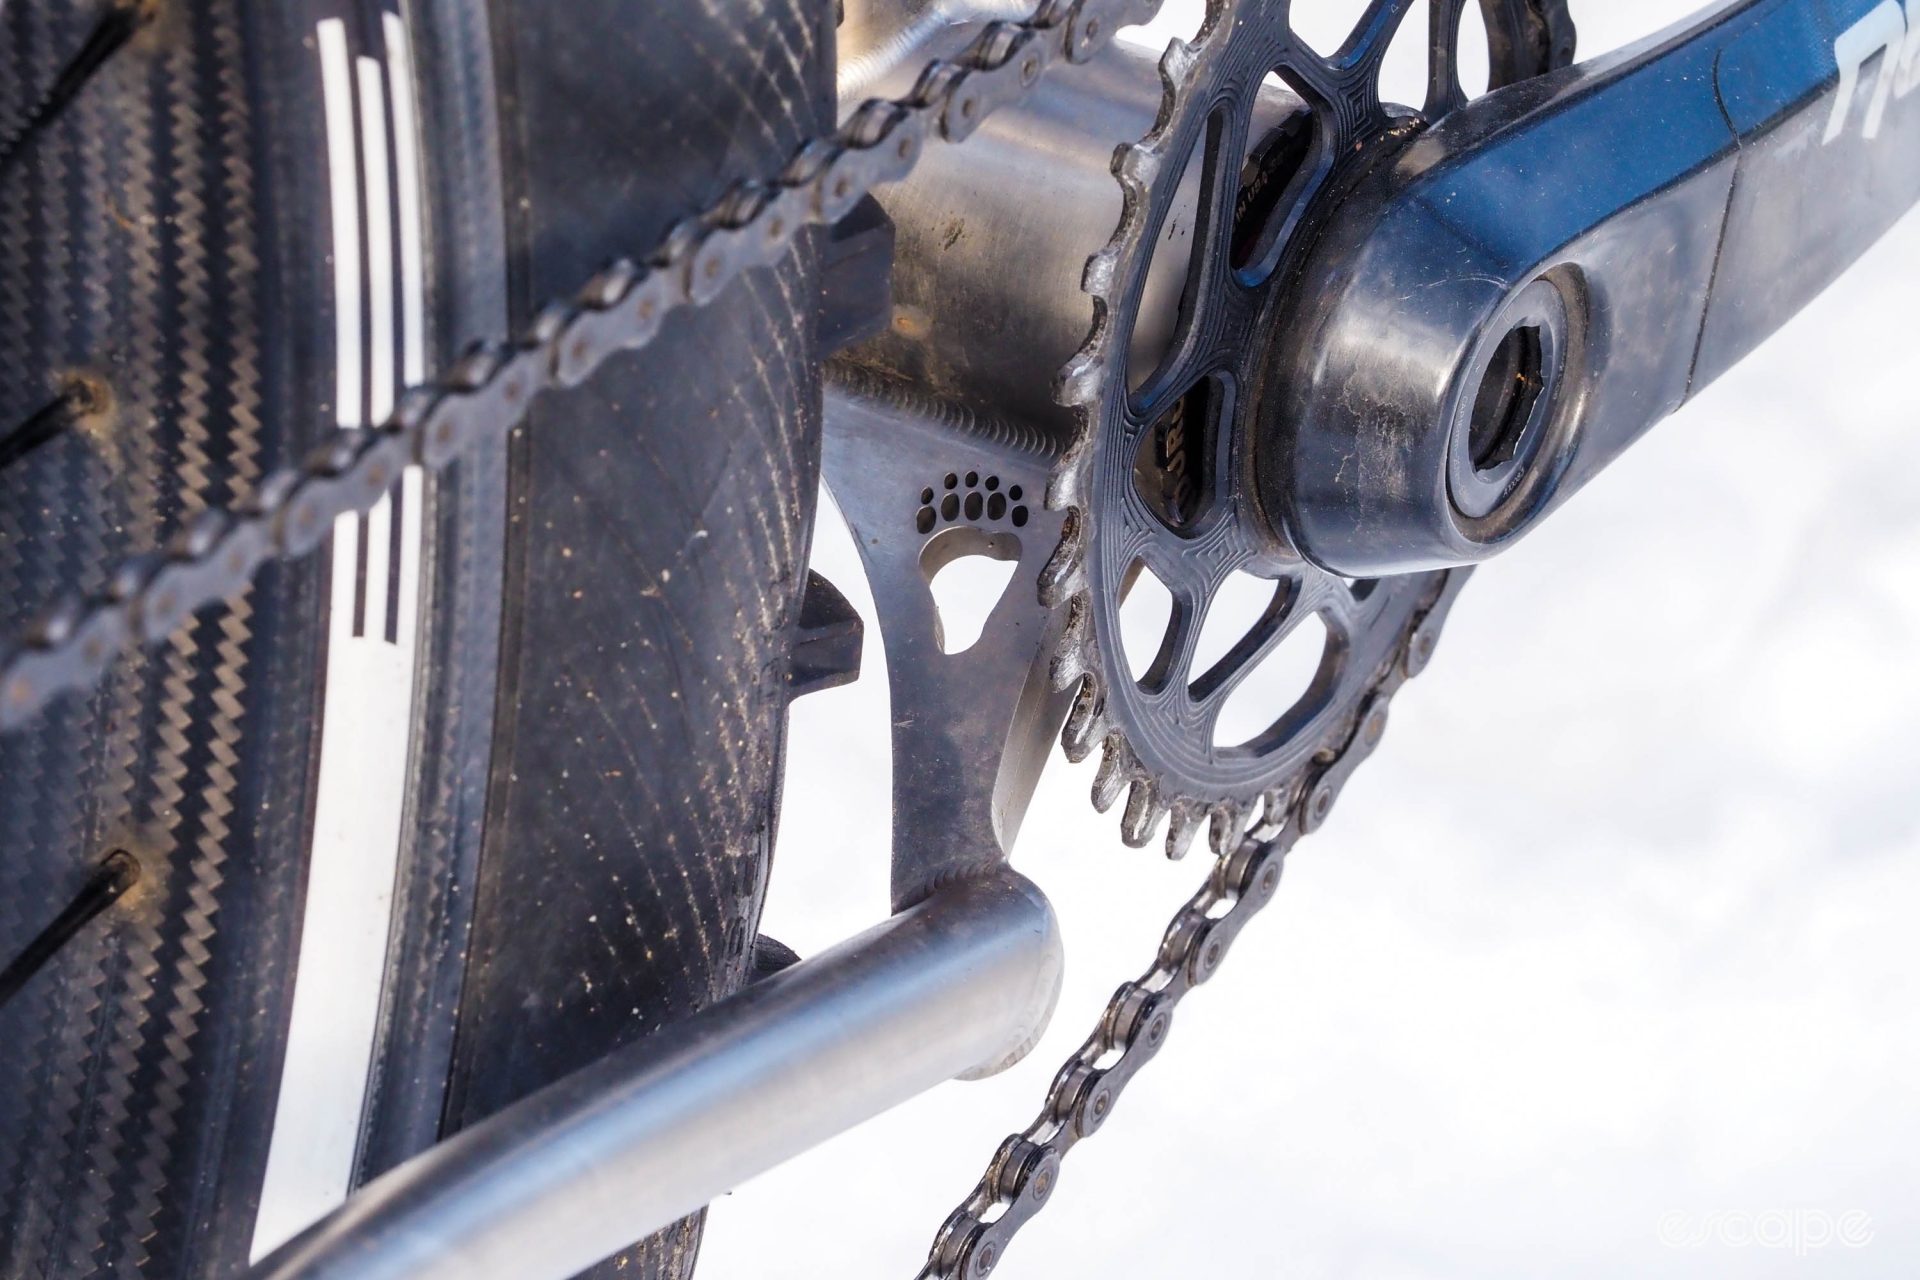 Rise Bikes Grizzly first generation chainstay semi-yoke